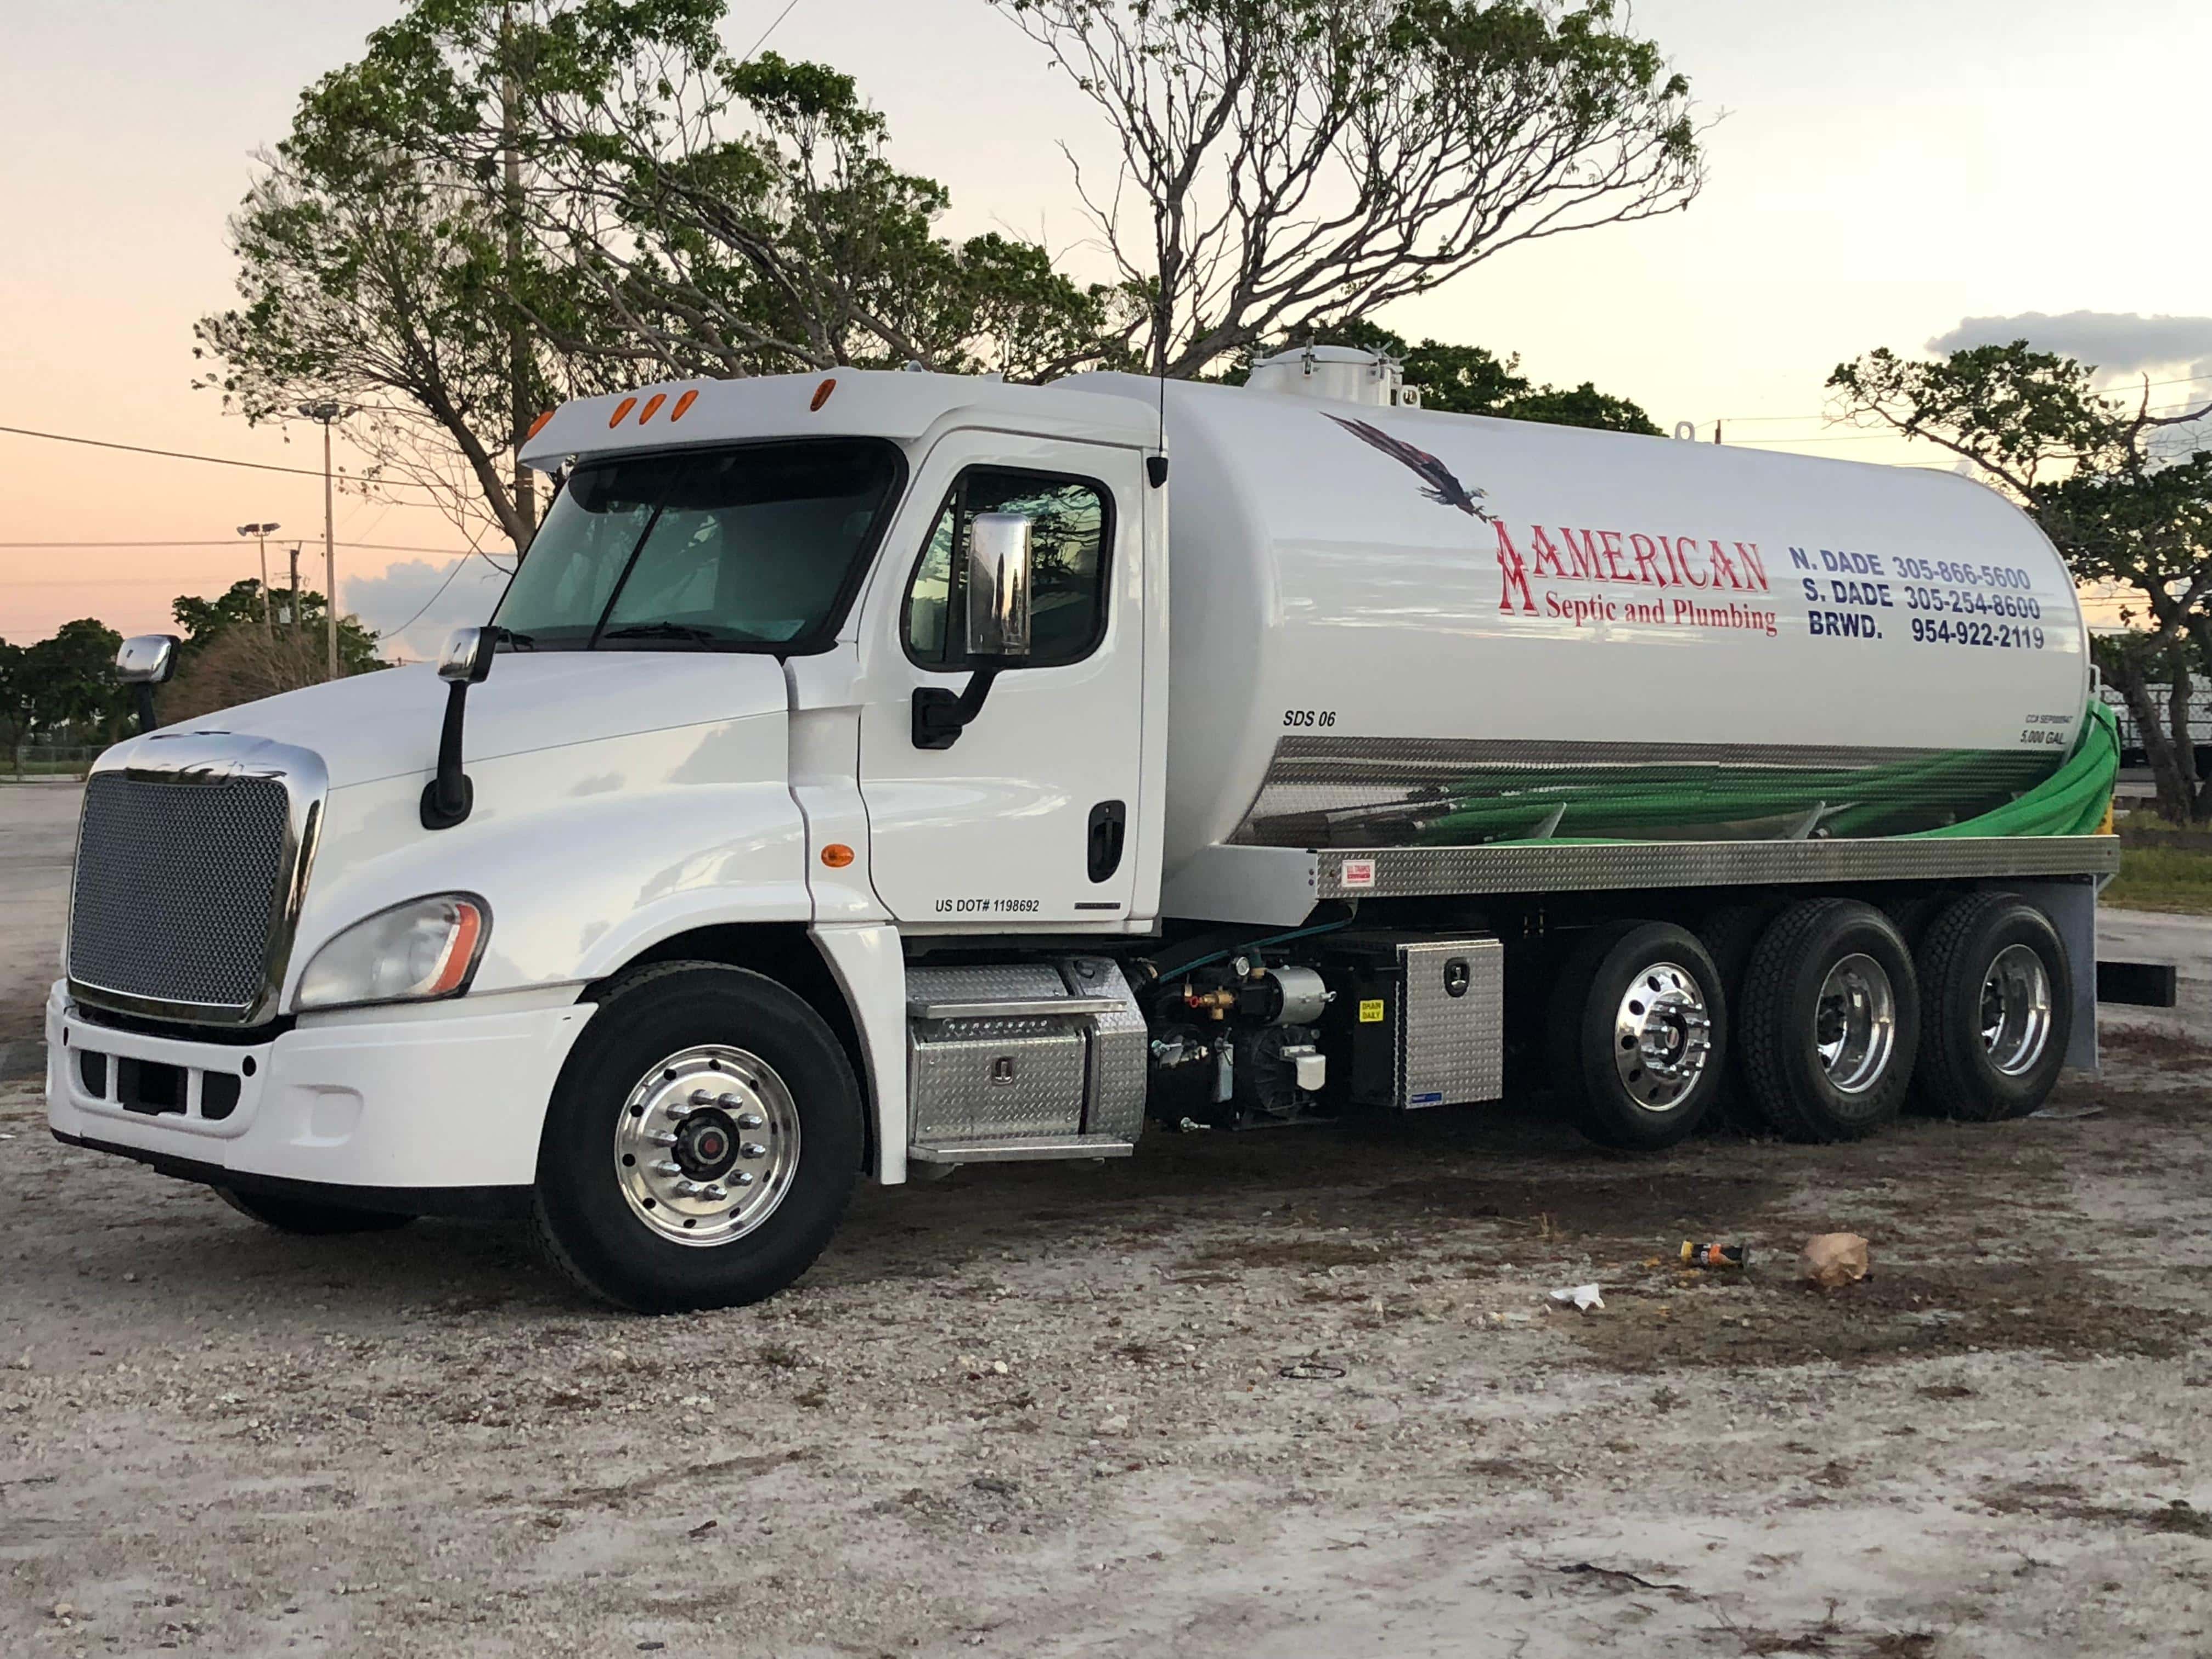 American Septic and Plumbing - North Miami Beach, FL, US, septic systems